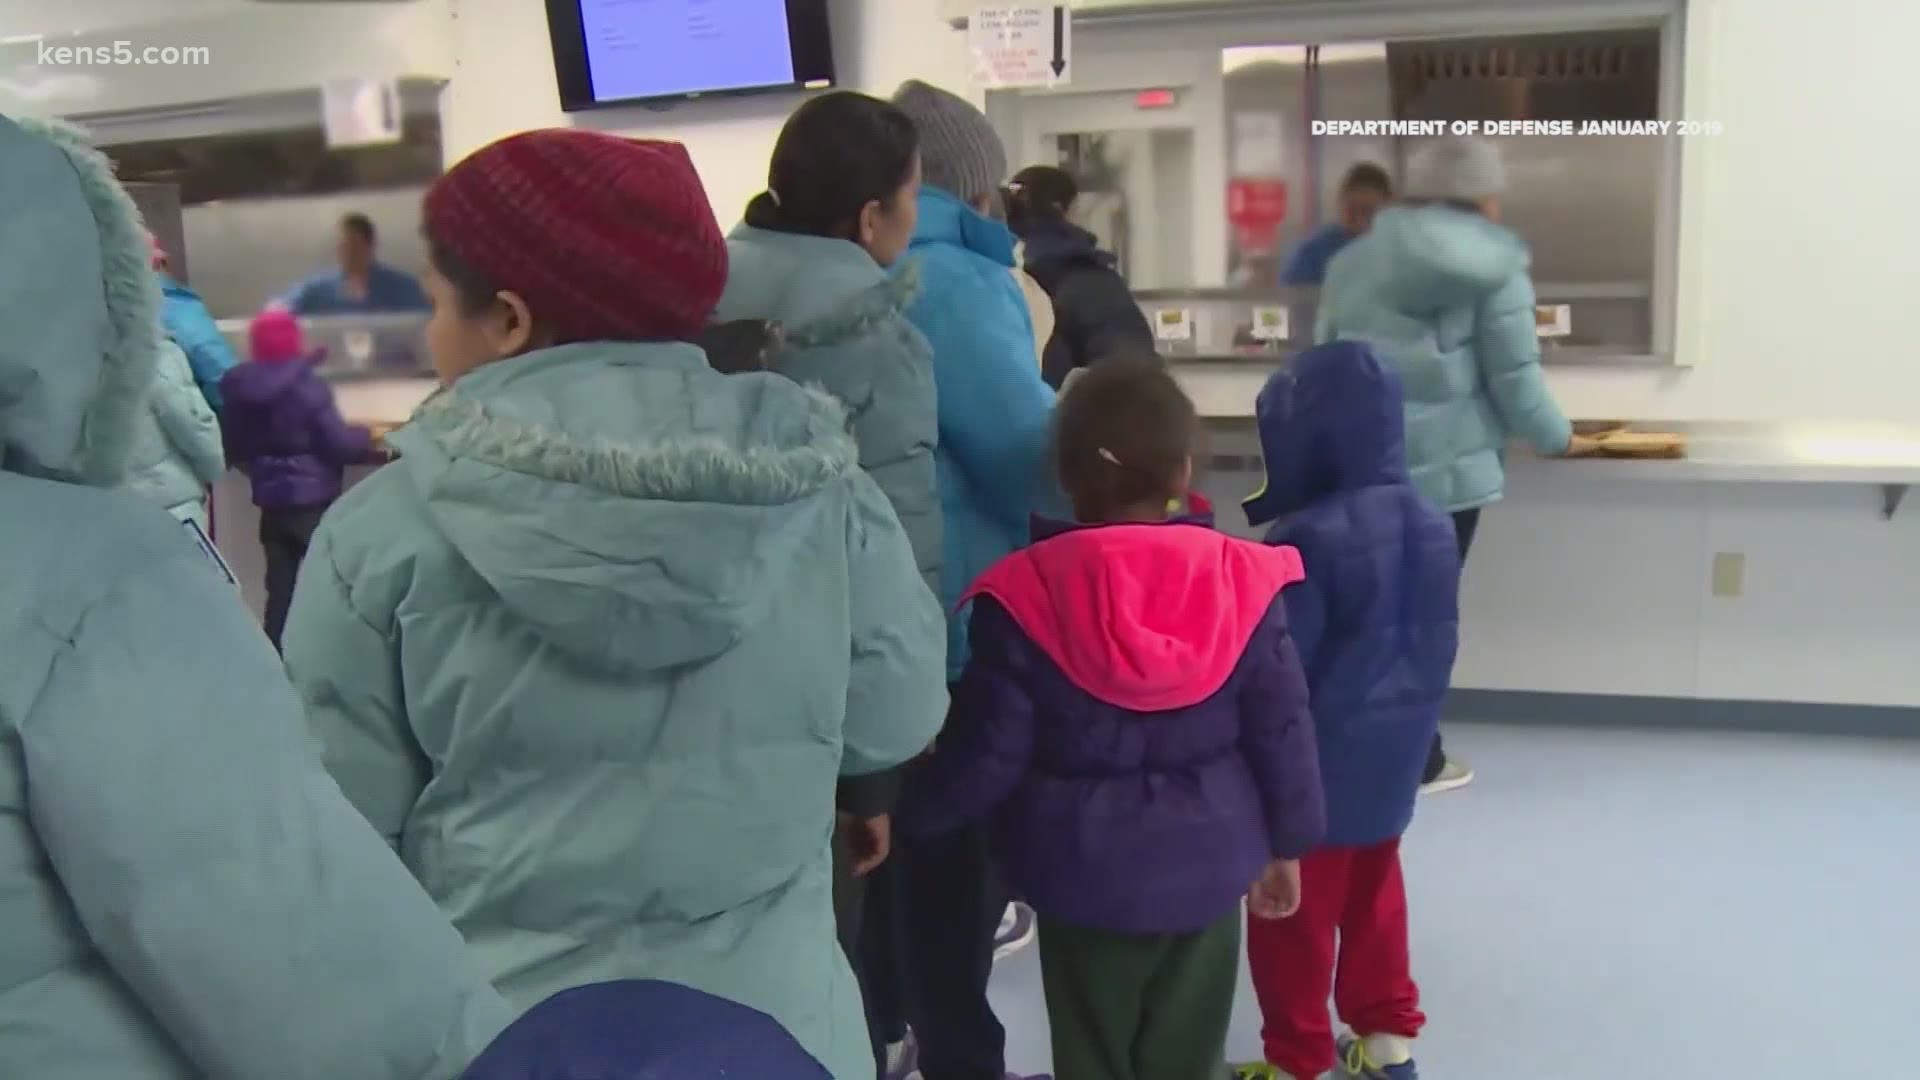 Families in ICE detention said they were served frozen food, one bottle of water per day, and had unusable toilets during last week's winter storms.